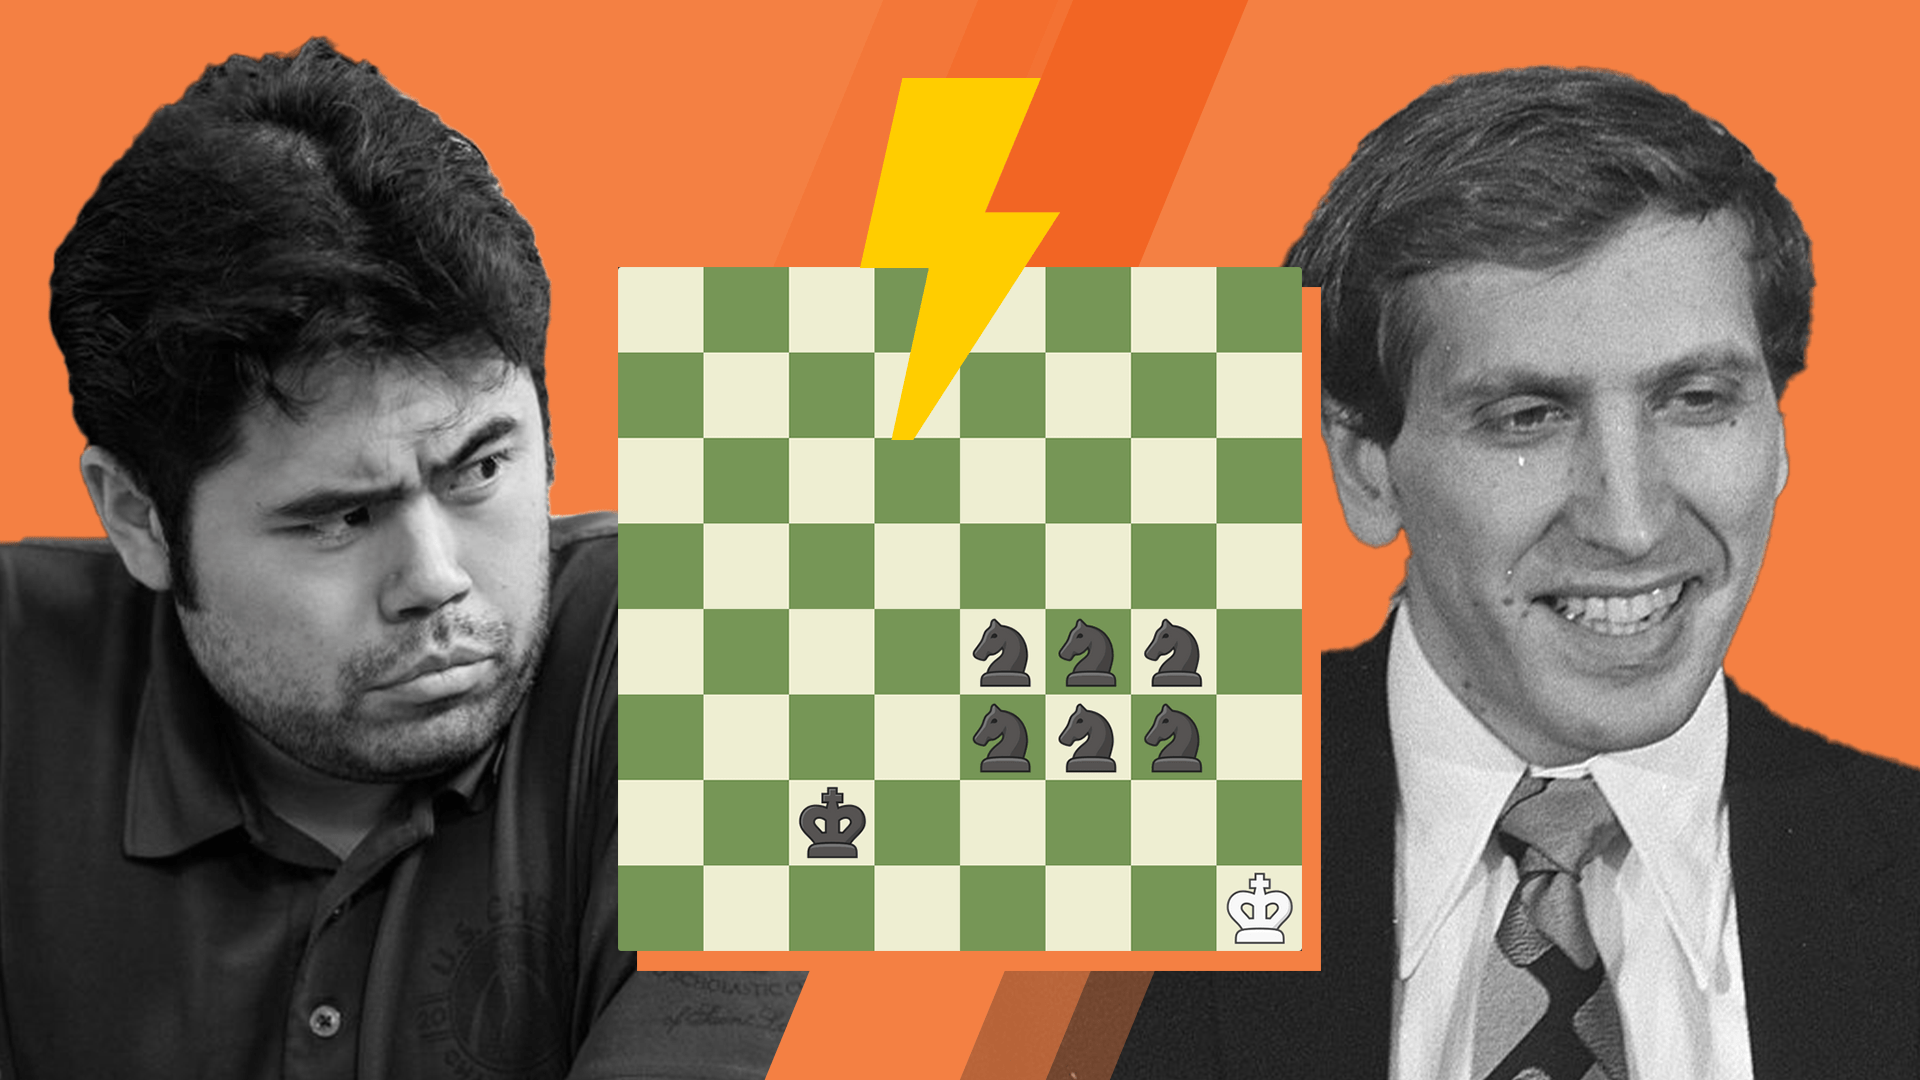 The Most Exciting Chess Games Ever